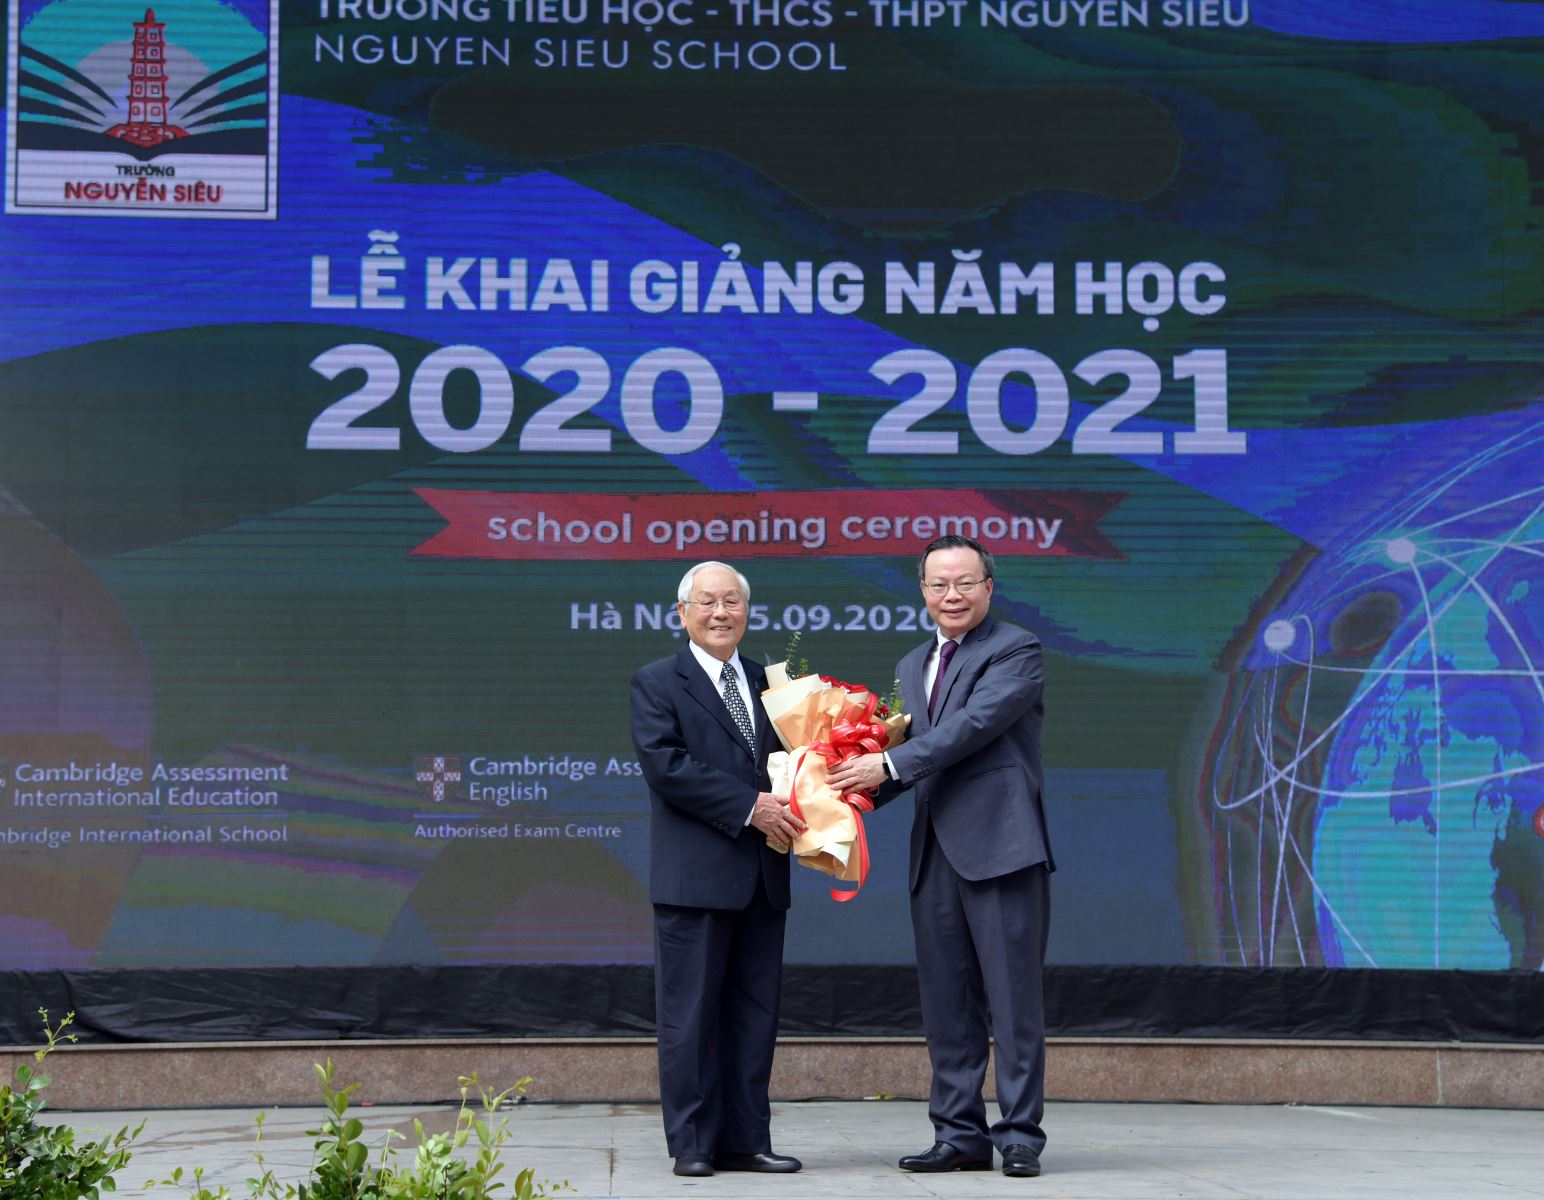 The Opening Ceremony of the 2020-2021 School Year